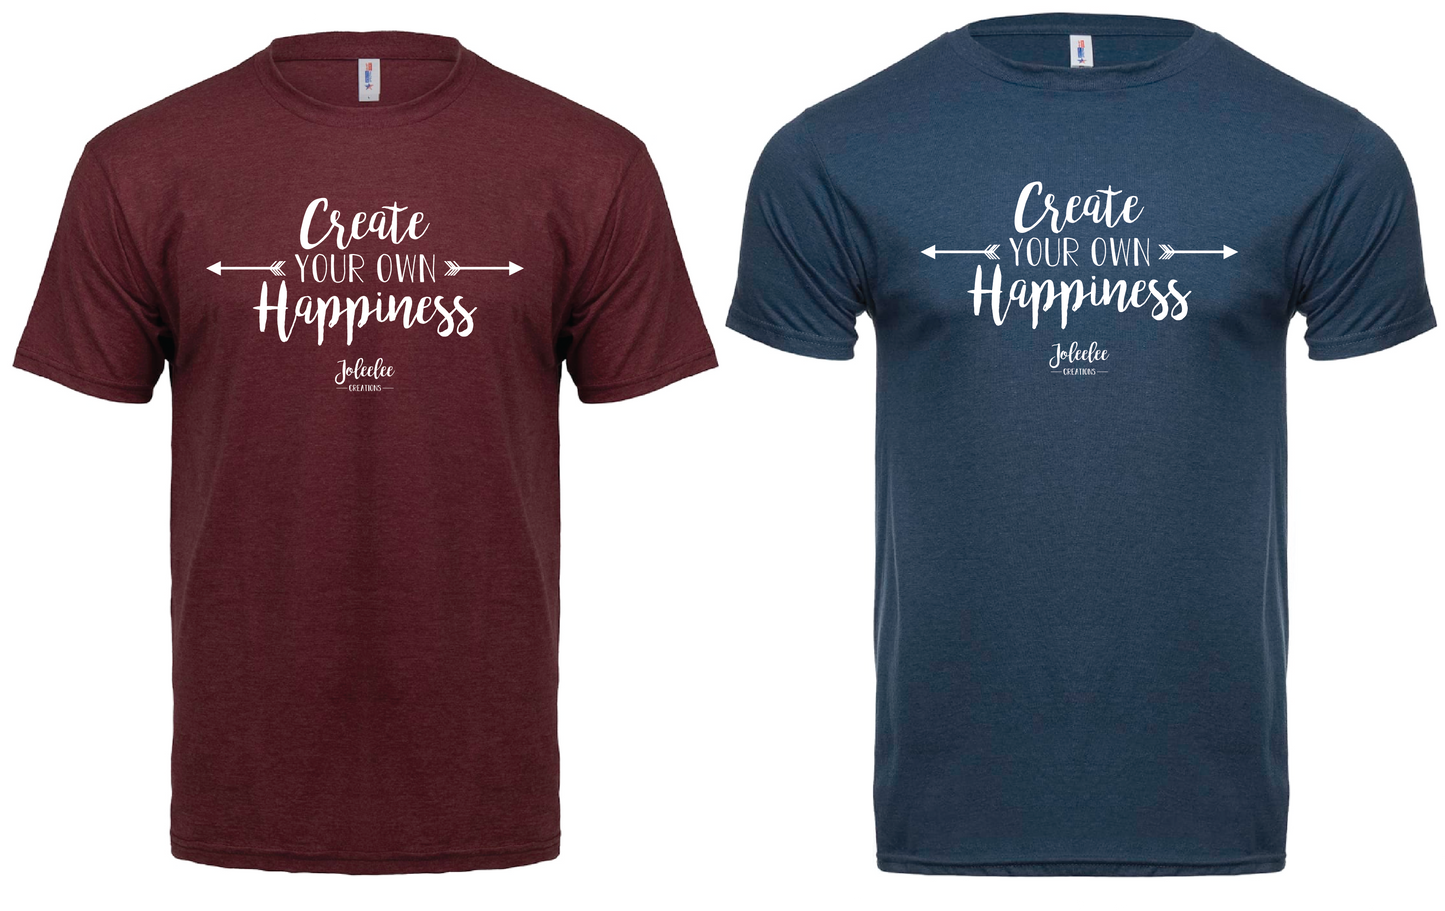 "Create Your Own Happiness" T-Shirt